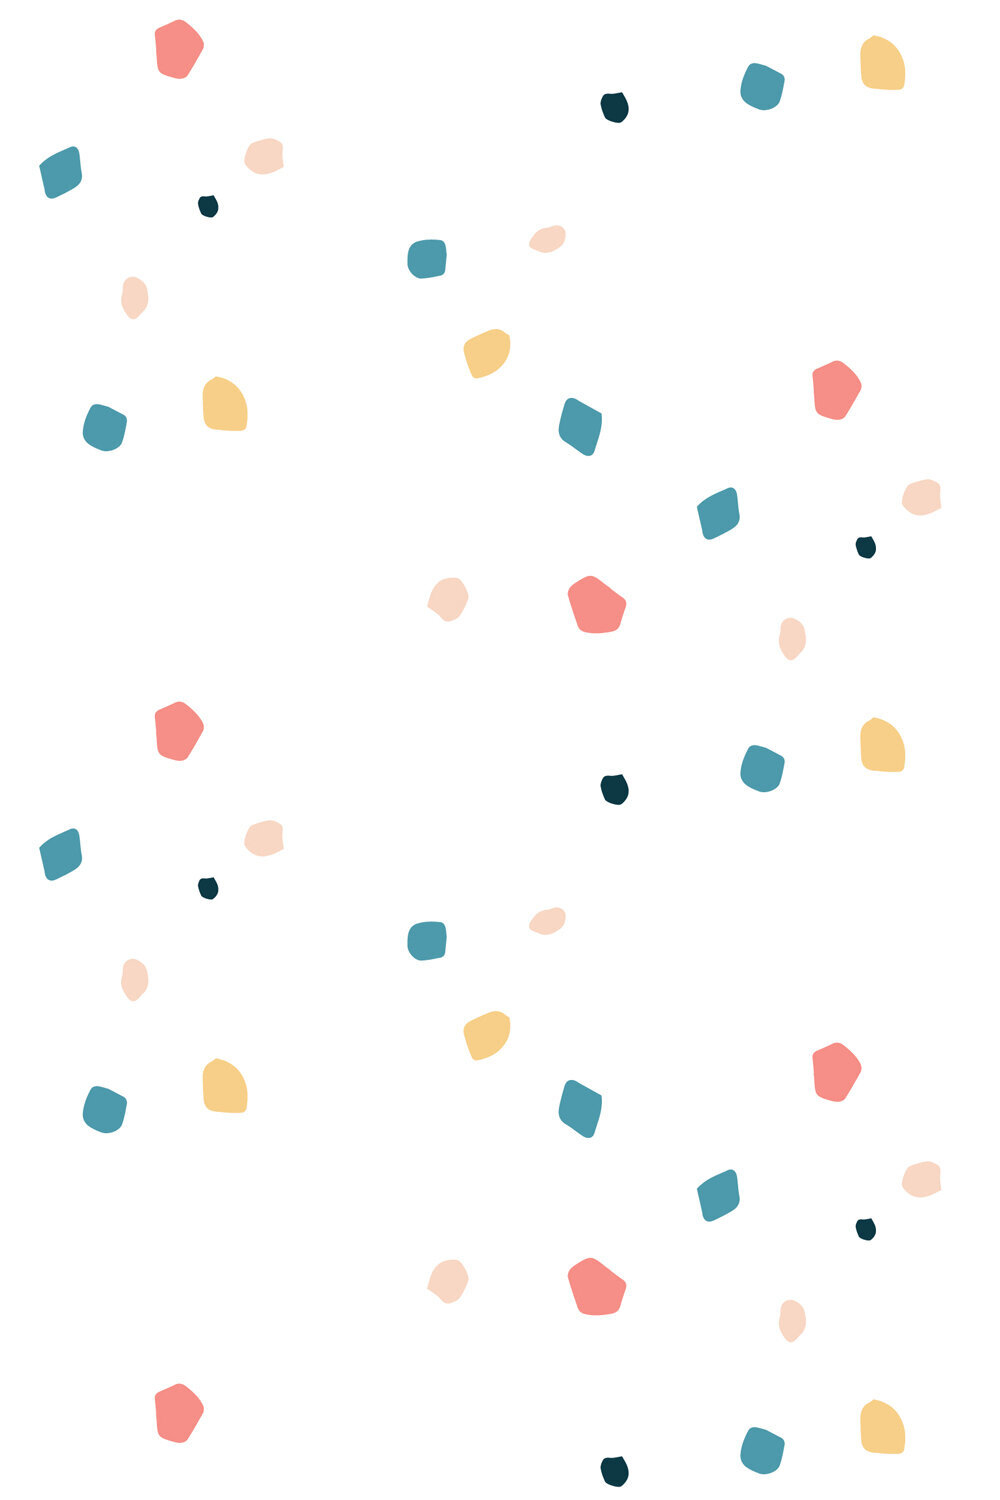 colorful, abstract pattern design